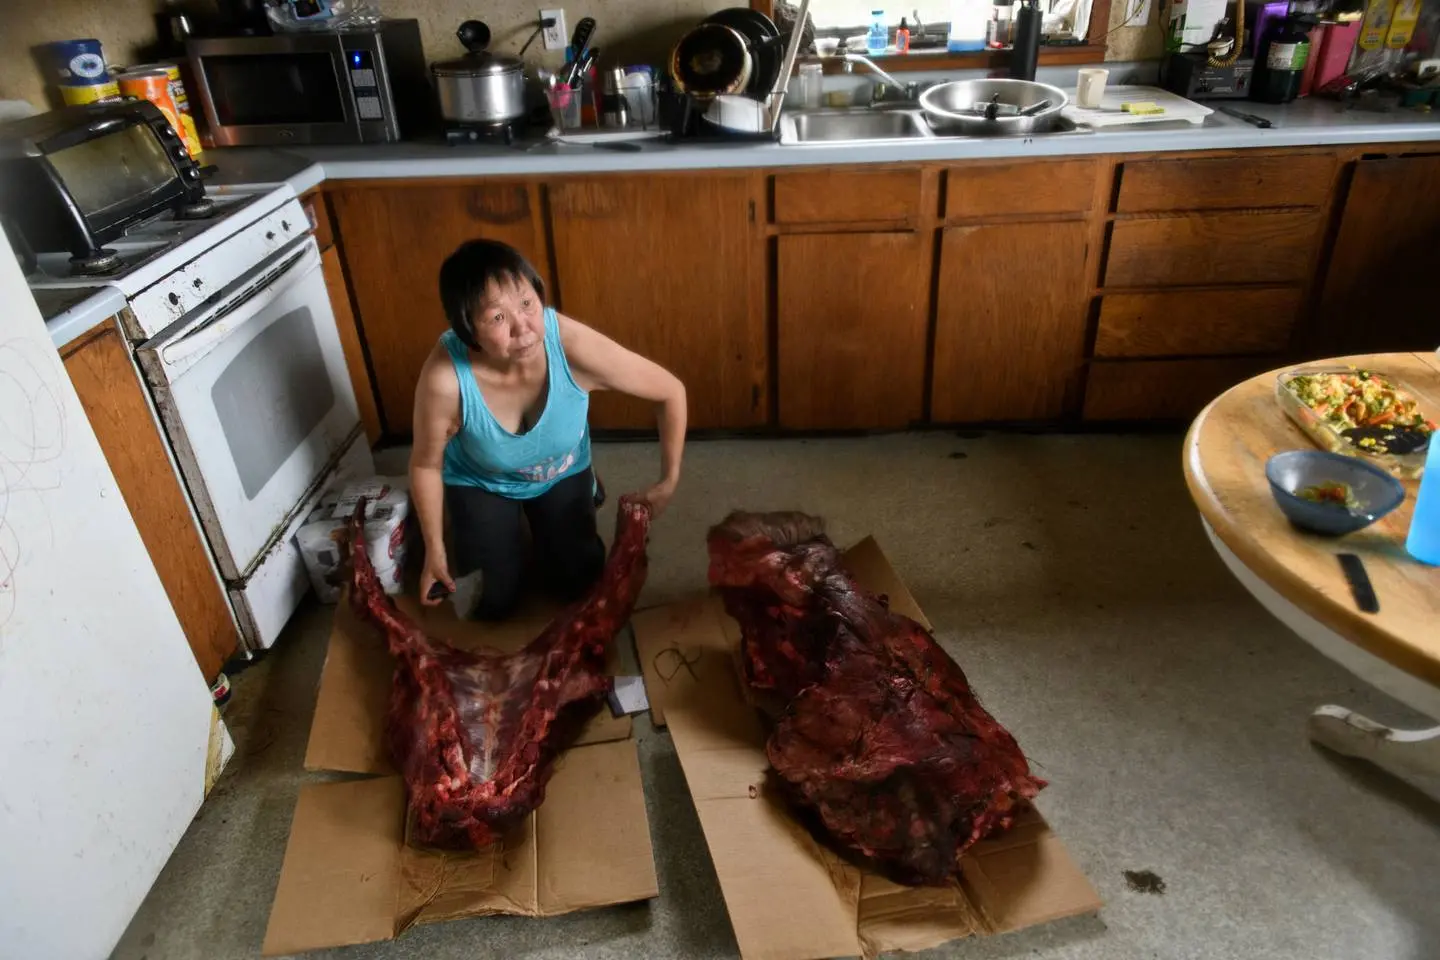 Another Emmonak resident cuts moose meat in her home.